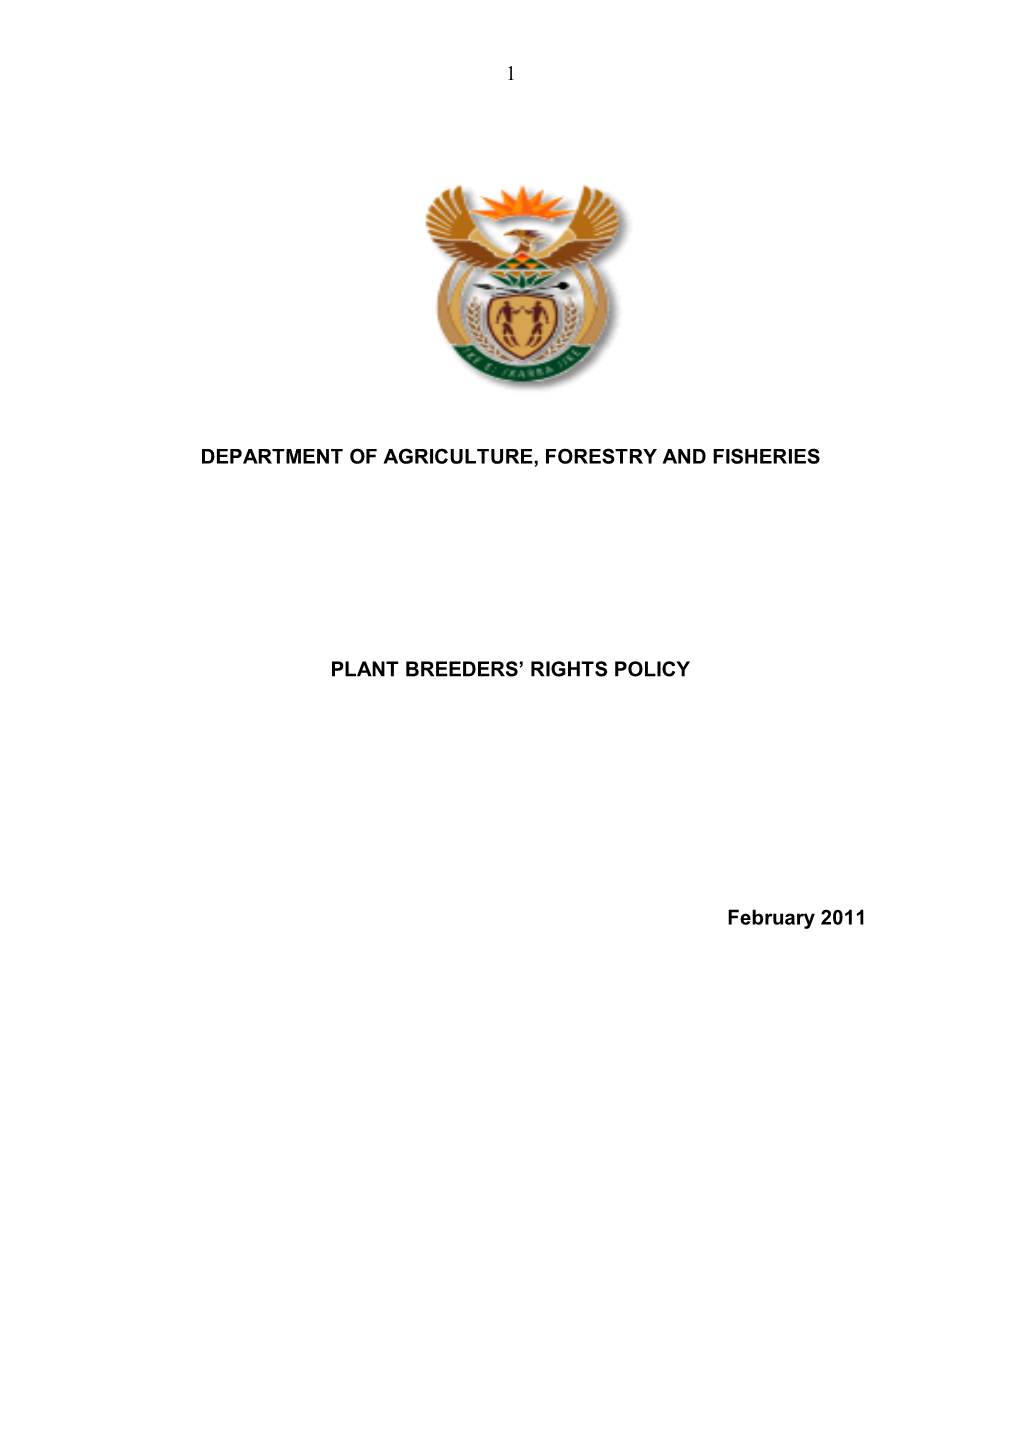 Plant Breeders' Rights Policy